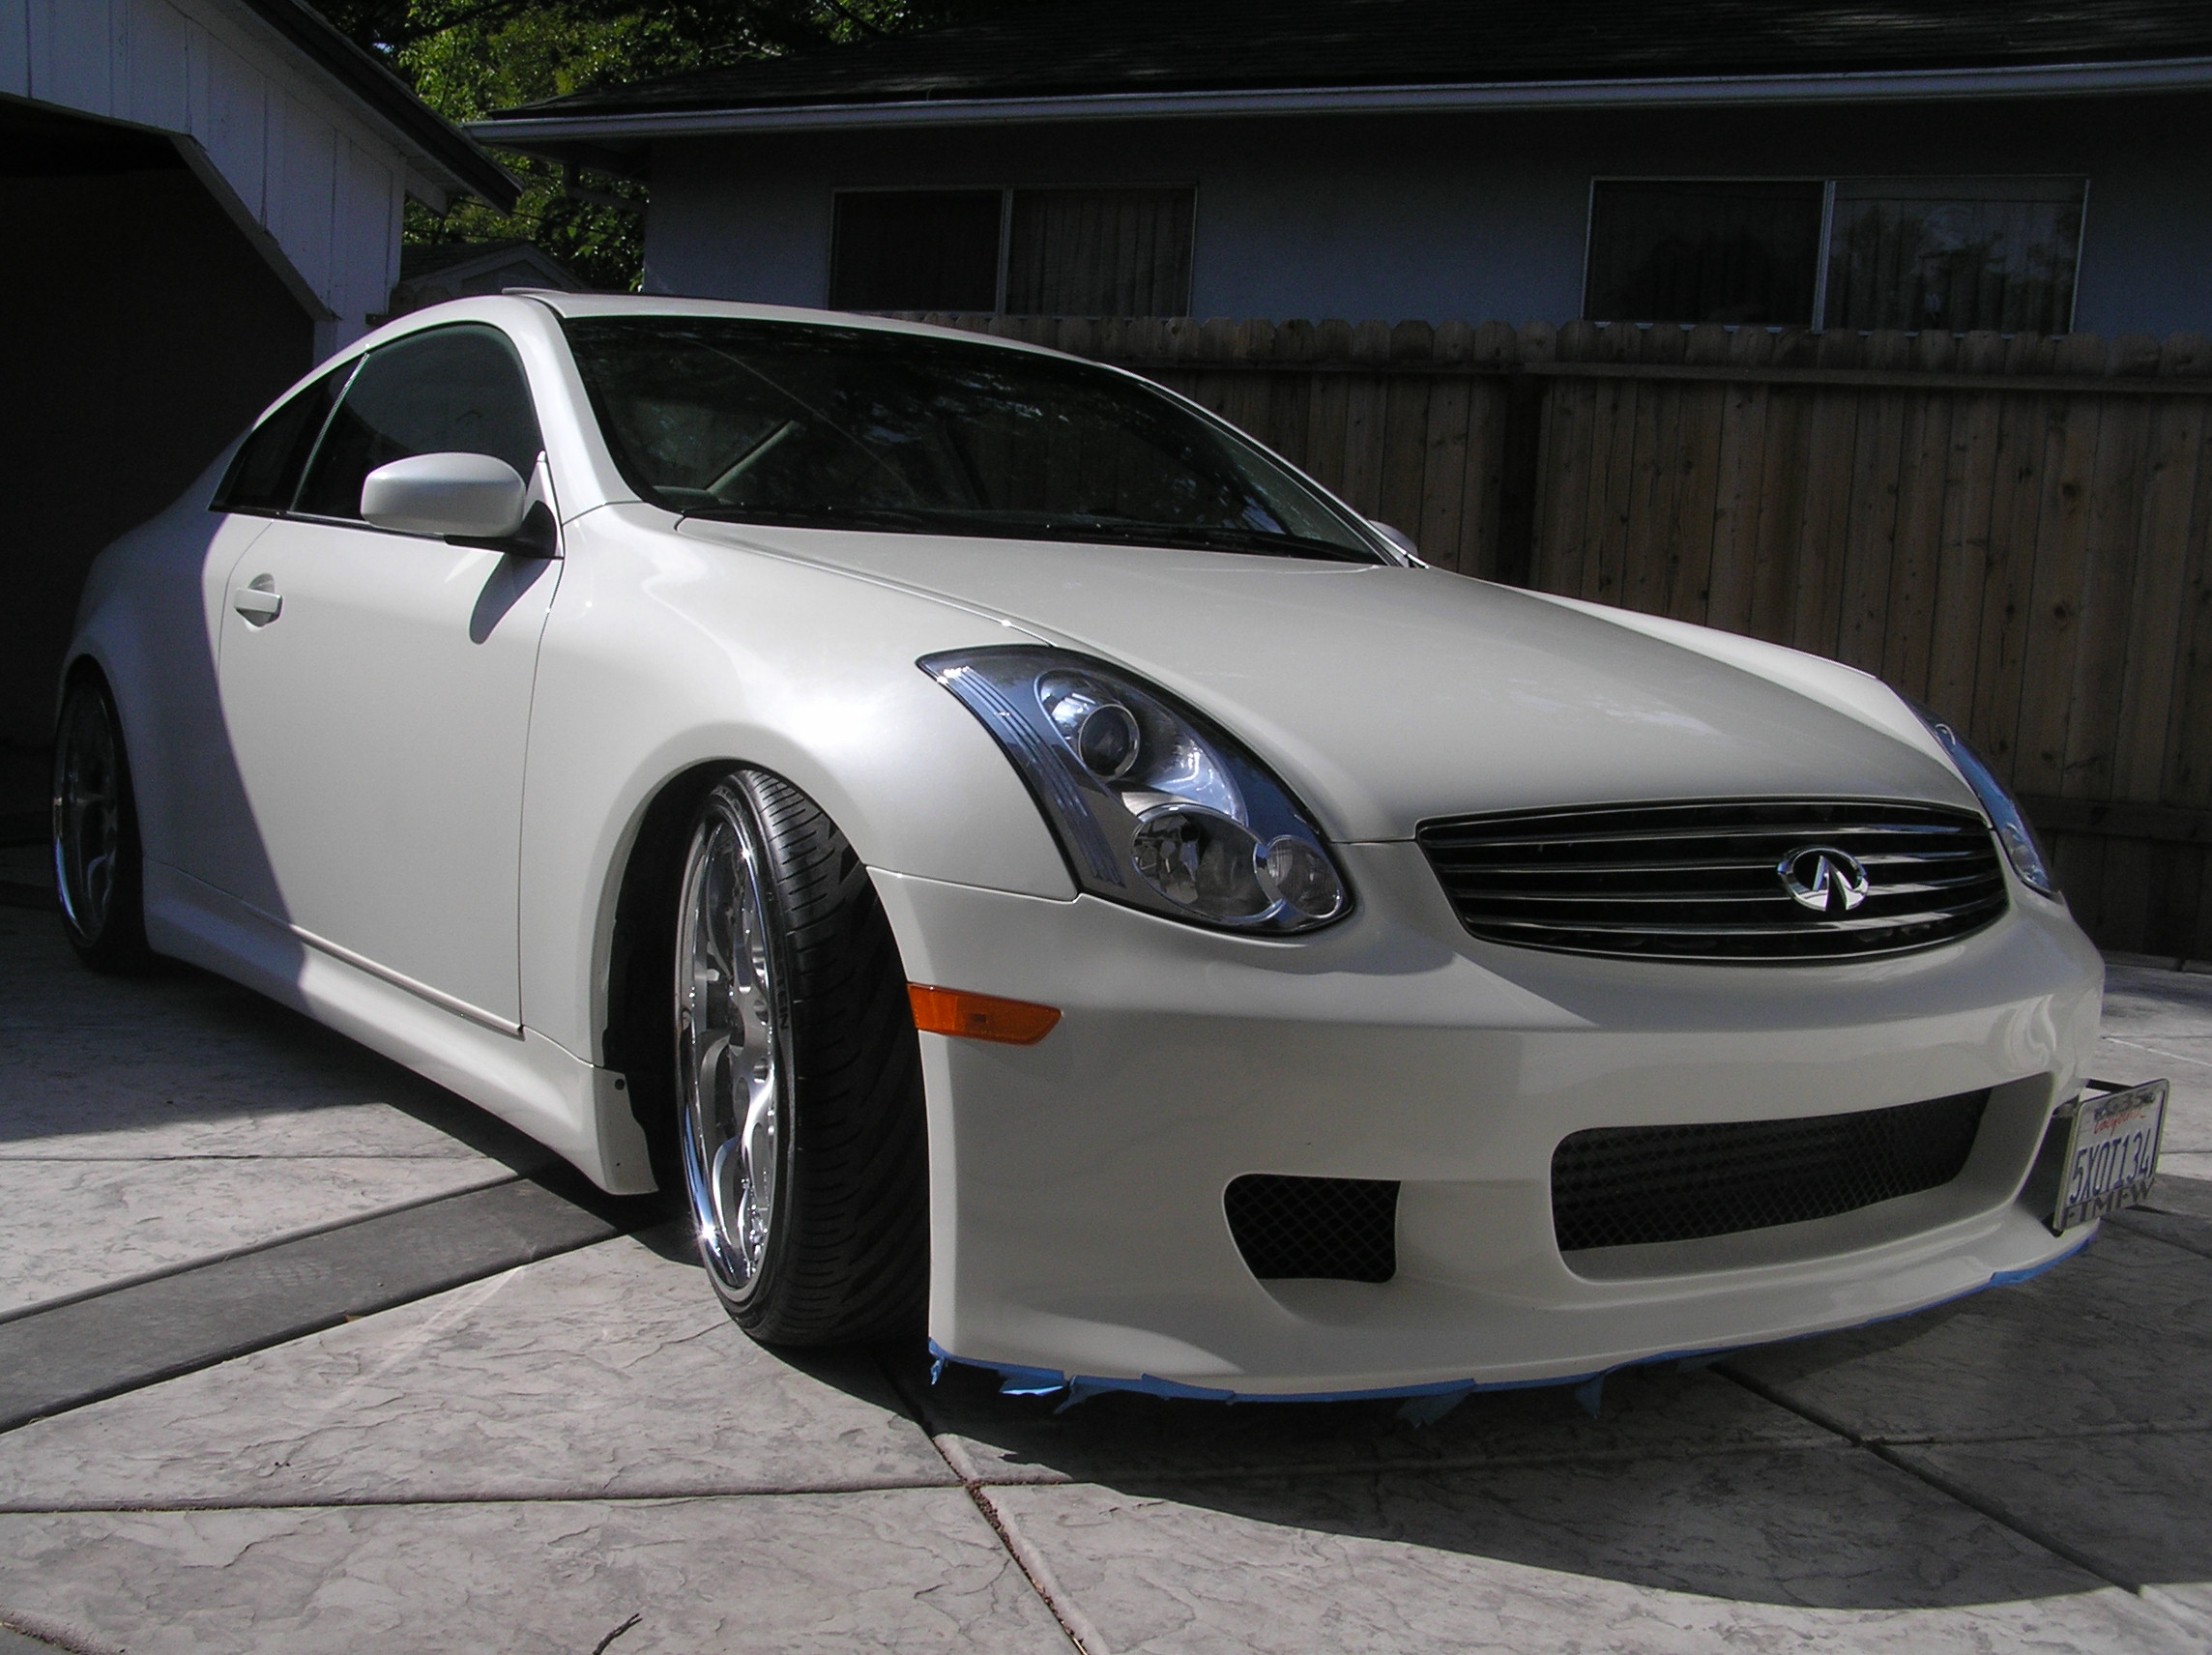 2007 Infiniti G35 Coupe Supercharged.